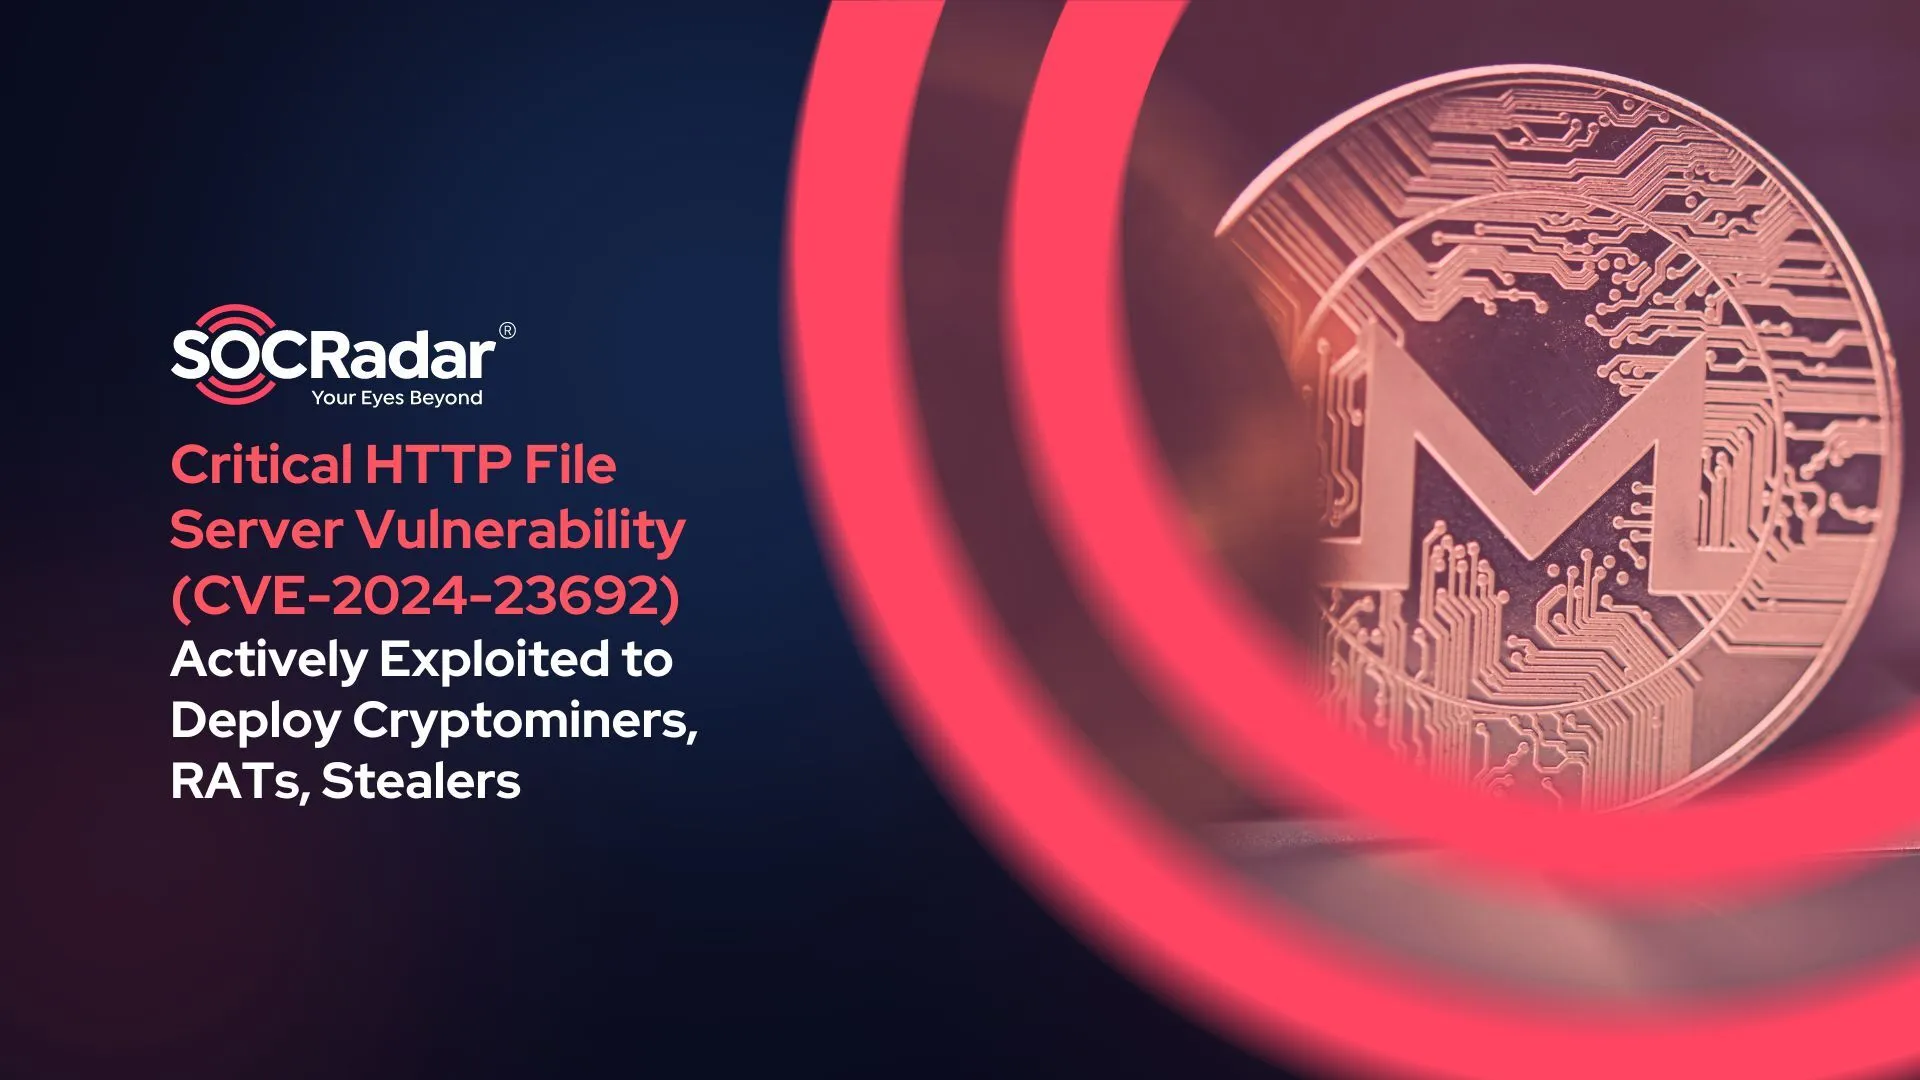 SOCRadar® Cyber Intelligence Inc. | Critical HTTP File Server Vulnerability (CVE-2024-23692) Actively Exploited to Deploy Cryptomining Malware, RATs, Stealers